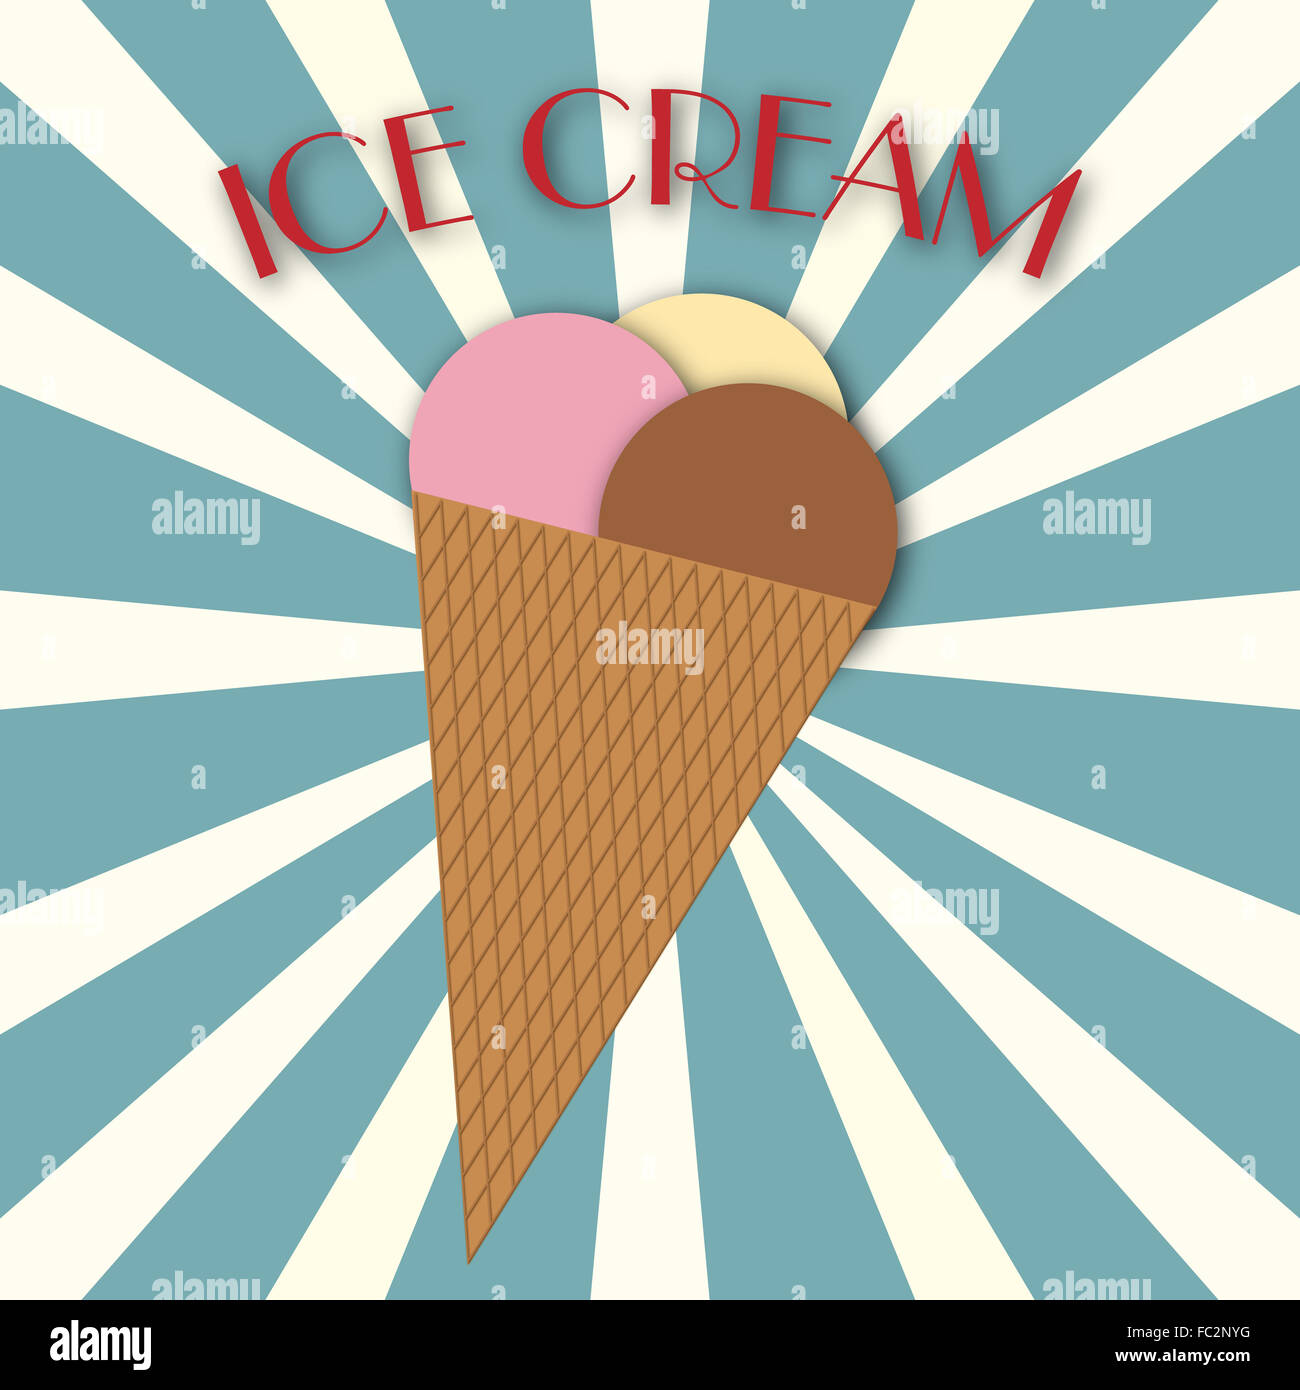 Illustraion of an ice cream with writing Stock Photo